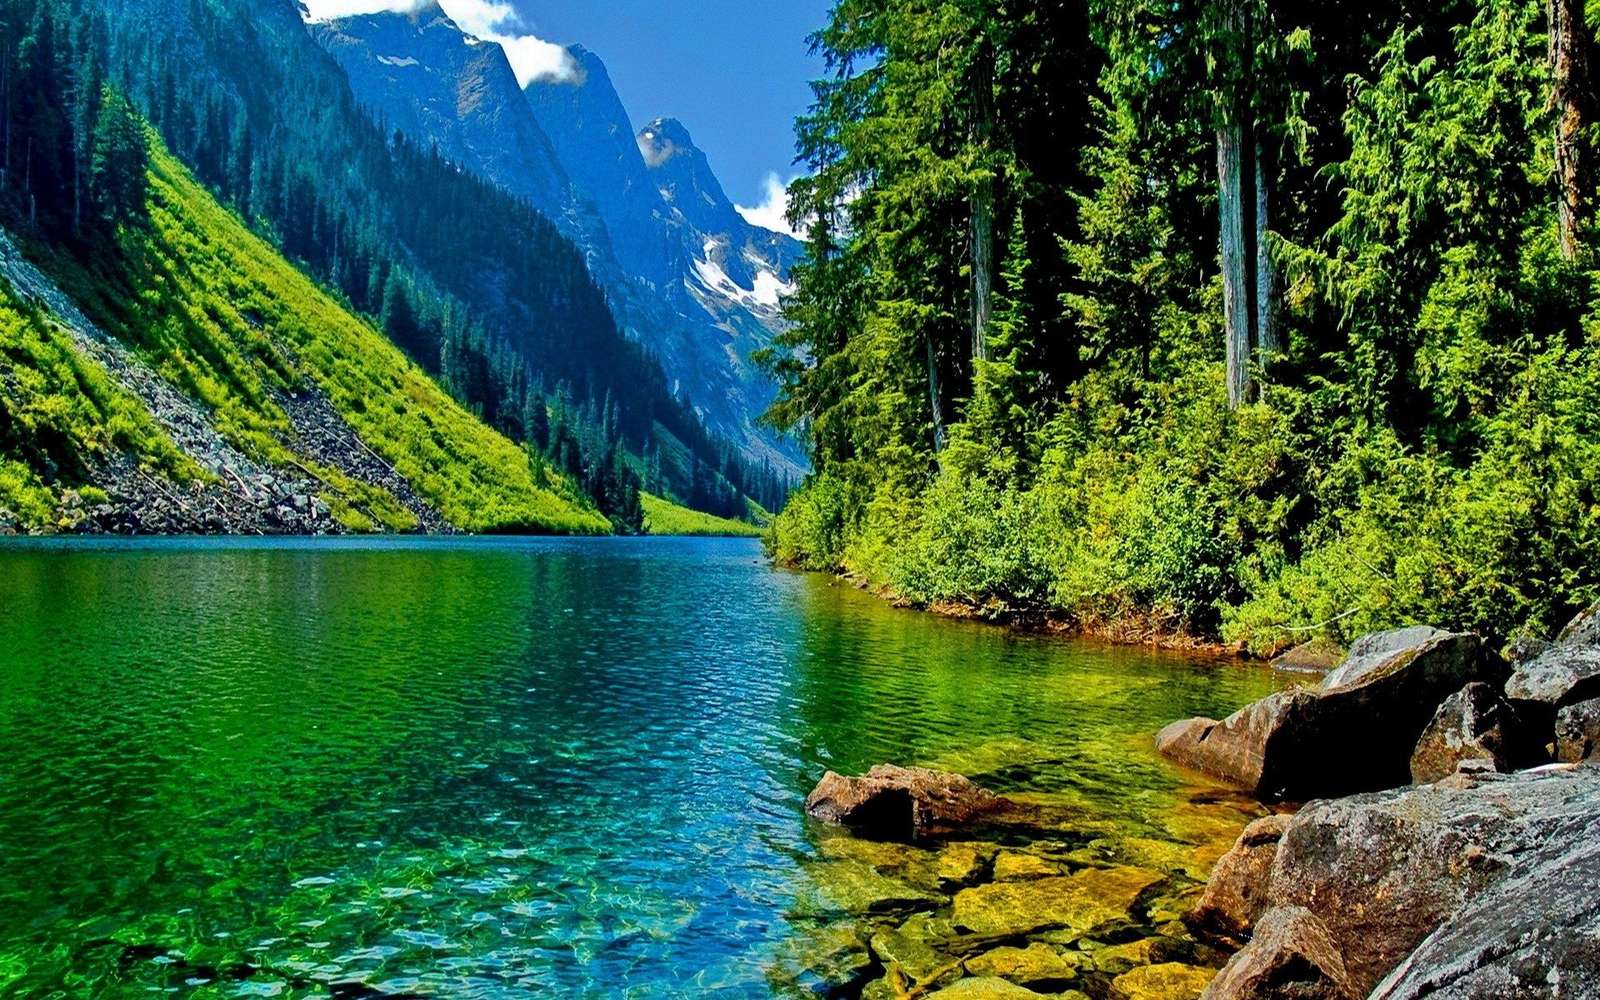 Blue Lake puzzle online from photo